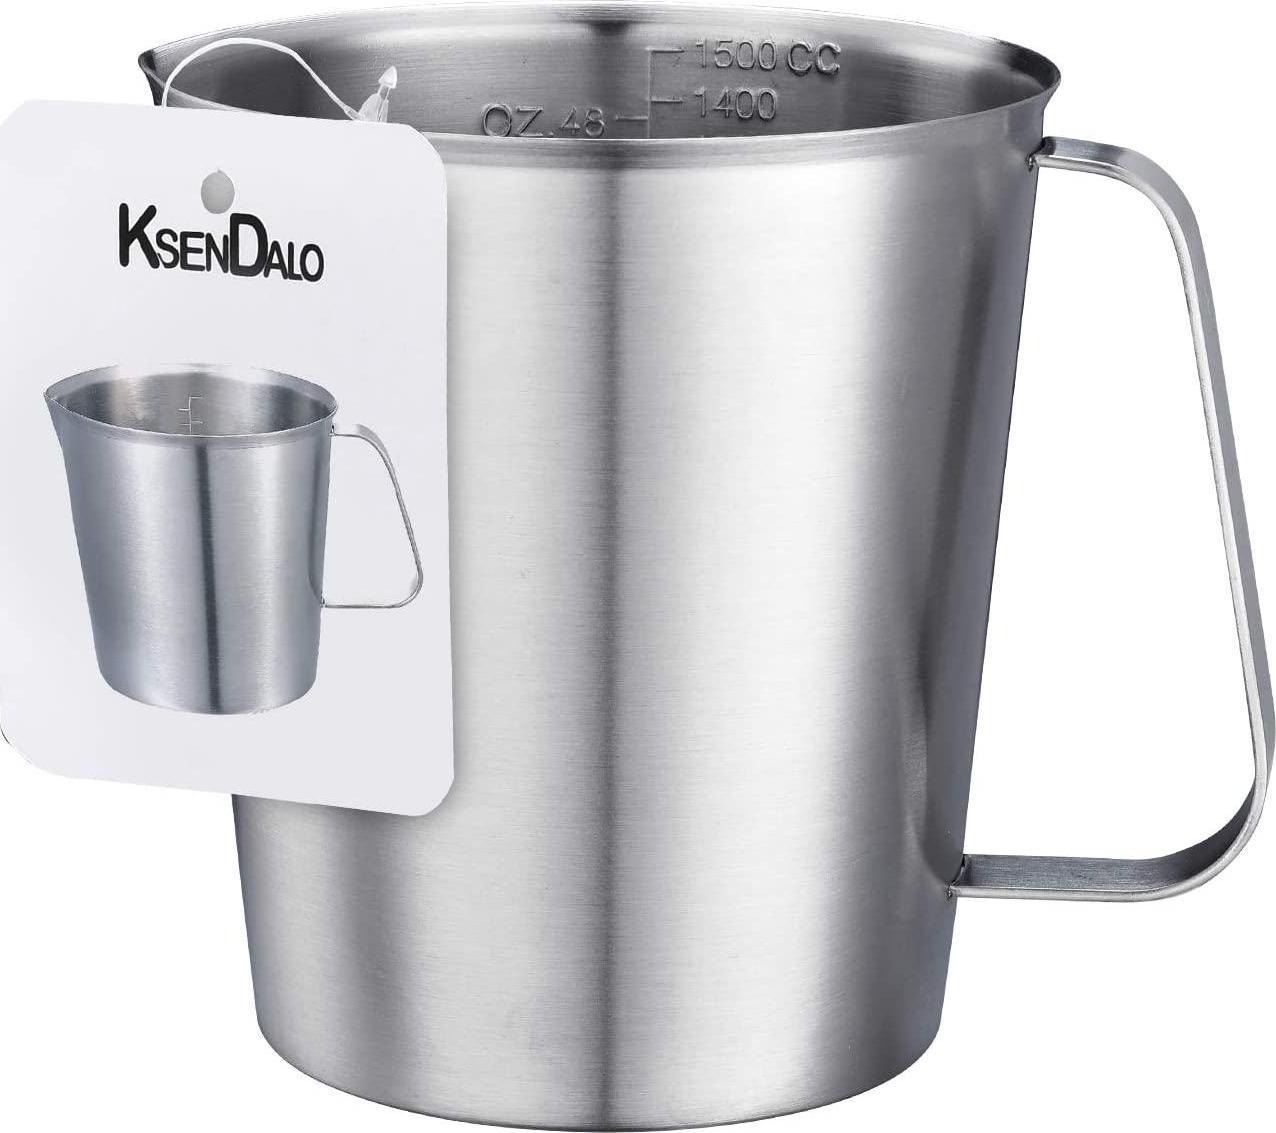 KSENDALO, Large Stainless Steel Measuring Cup, KSENDALO Stainless Measuring Pitcher with Marking with Handle, 48 Ounces (1.5 Liter)